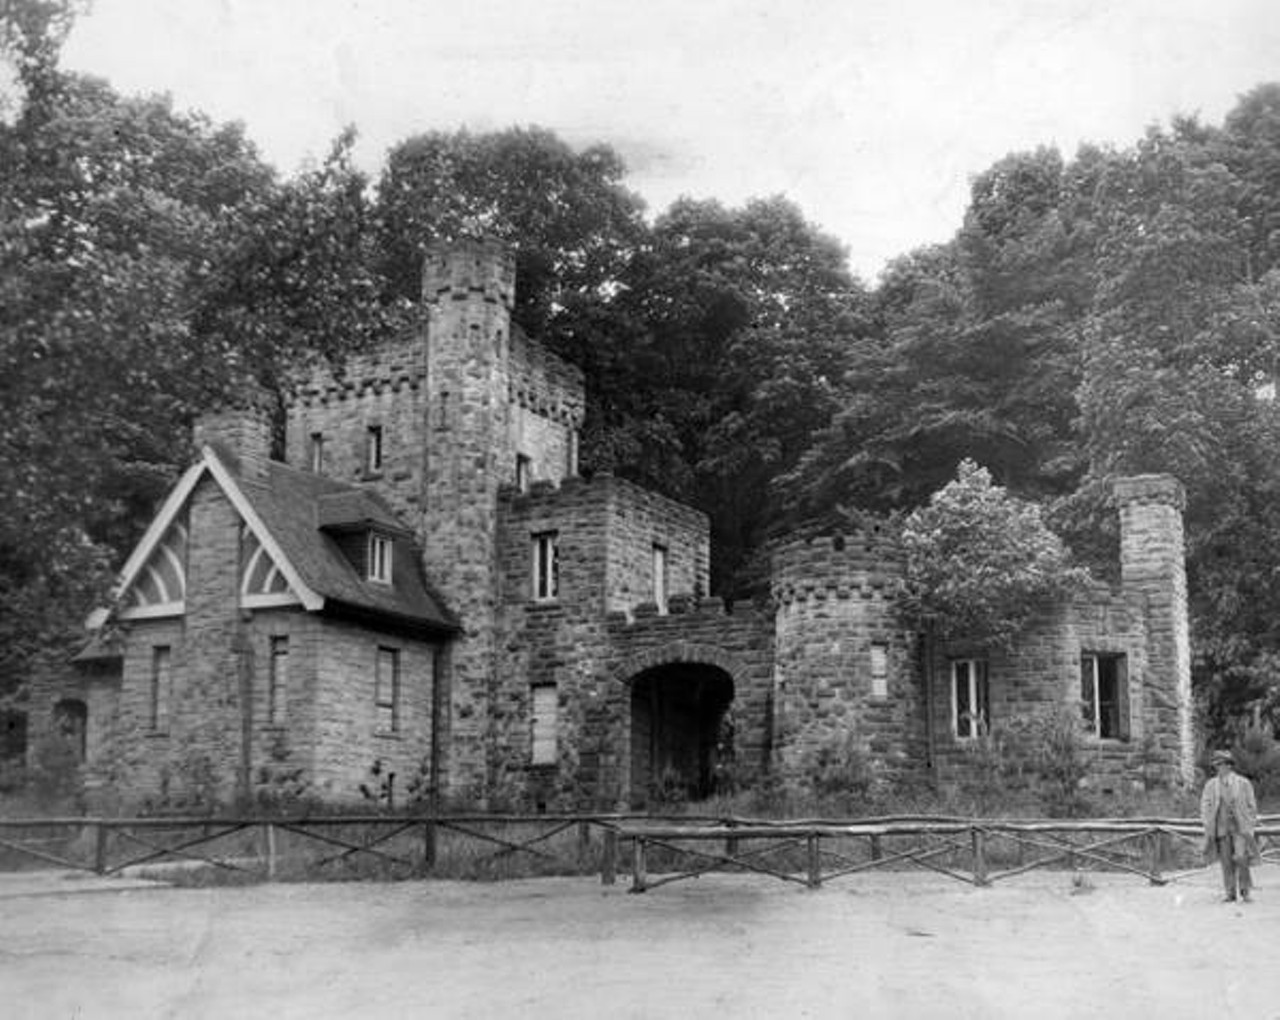  Squire's Castle, Chagrin Reservation, 1930 